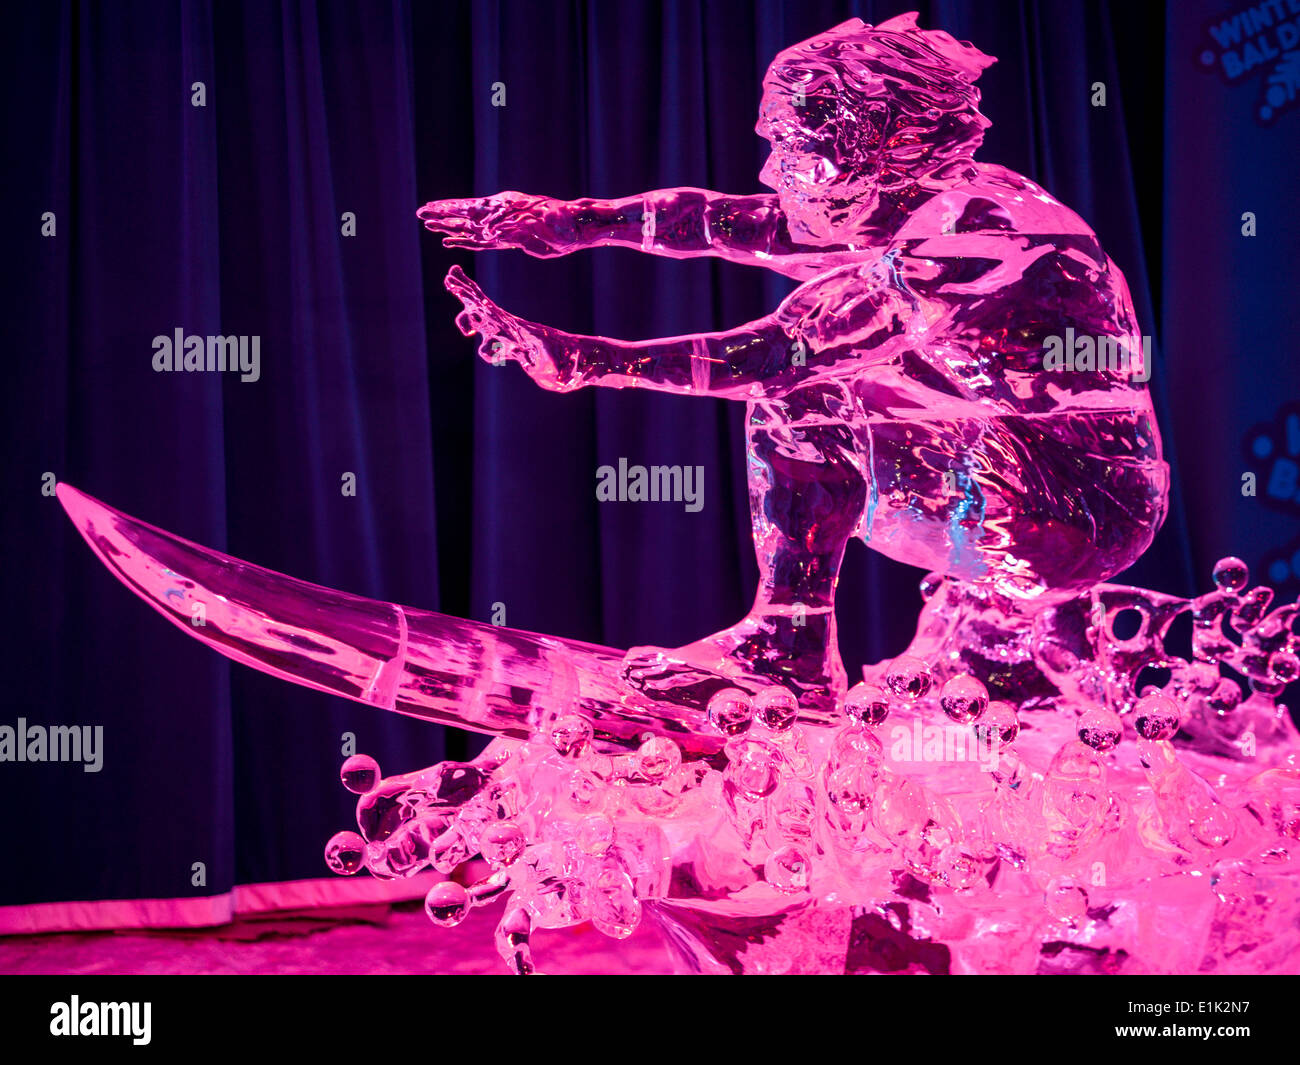 Freeze Frame: Surfing the Frozen Wave. An ice sculpture of a surfer riding his surfboard on a bubbling wave. Stock Photo